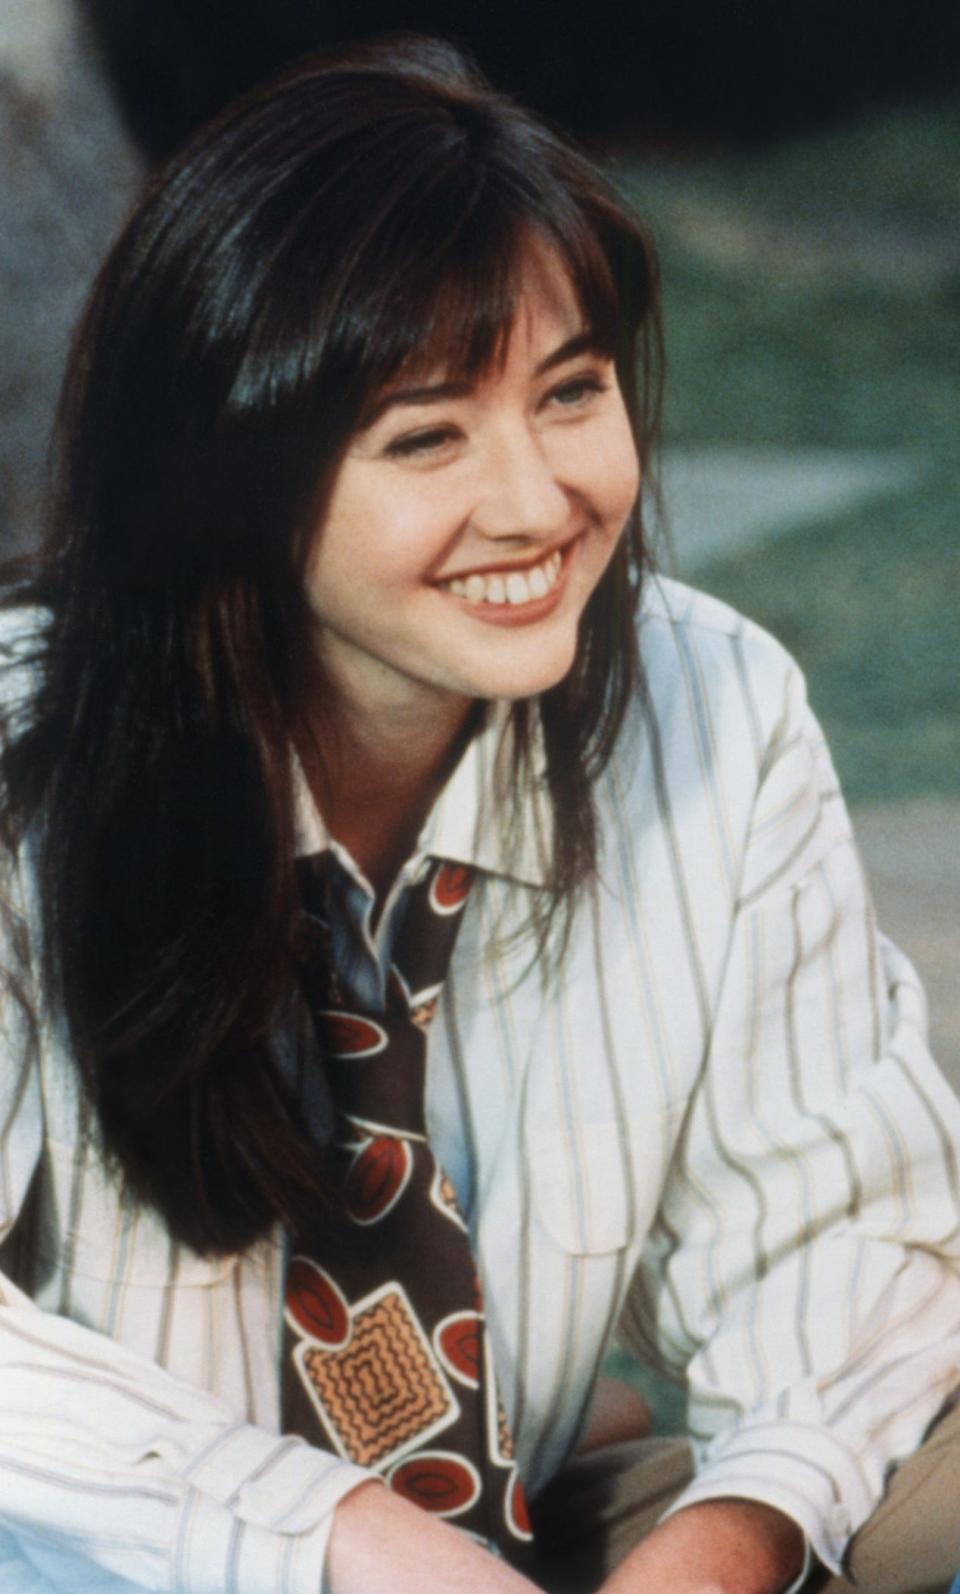 Doherty in the show as Brenda